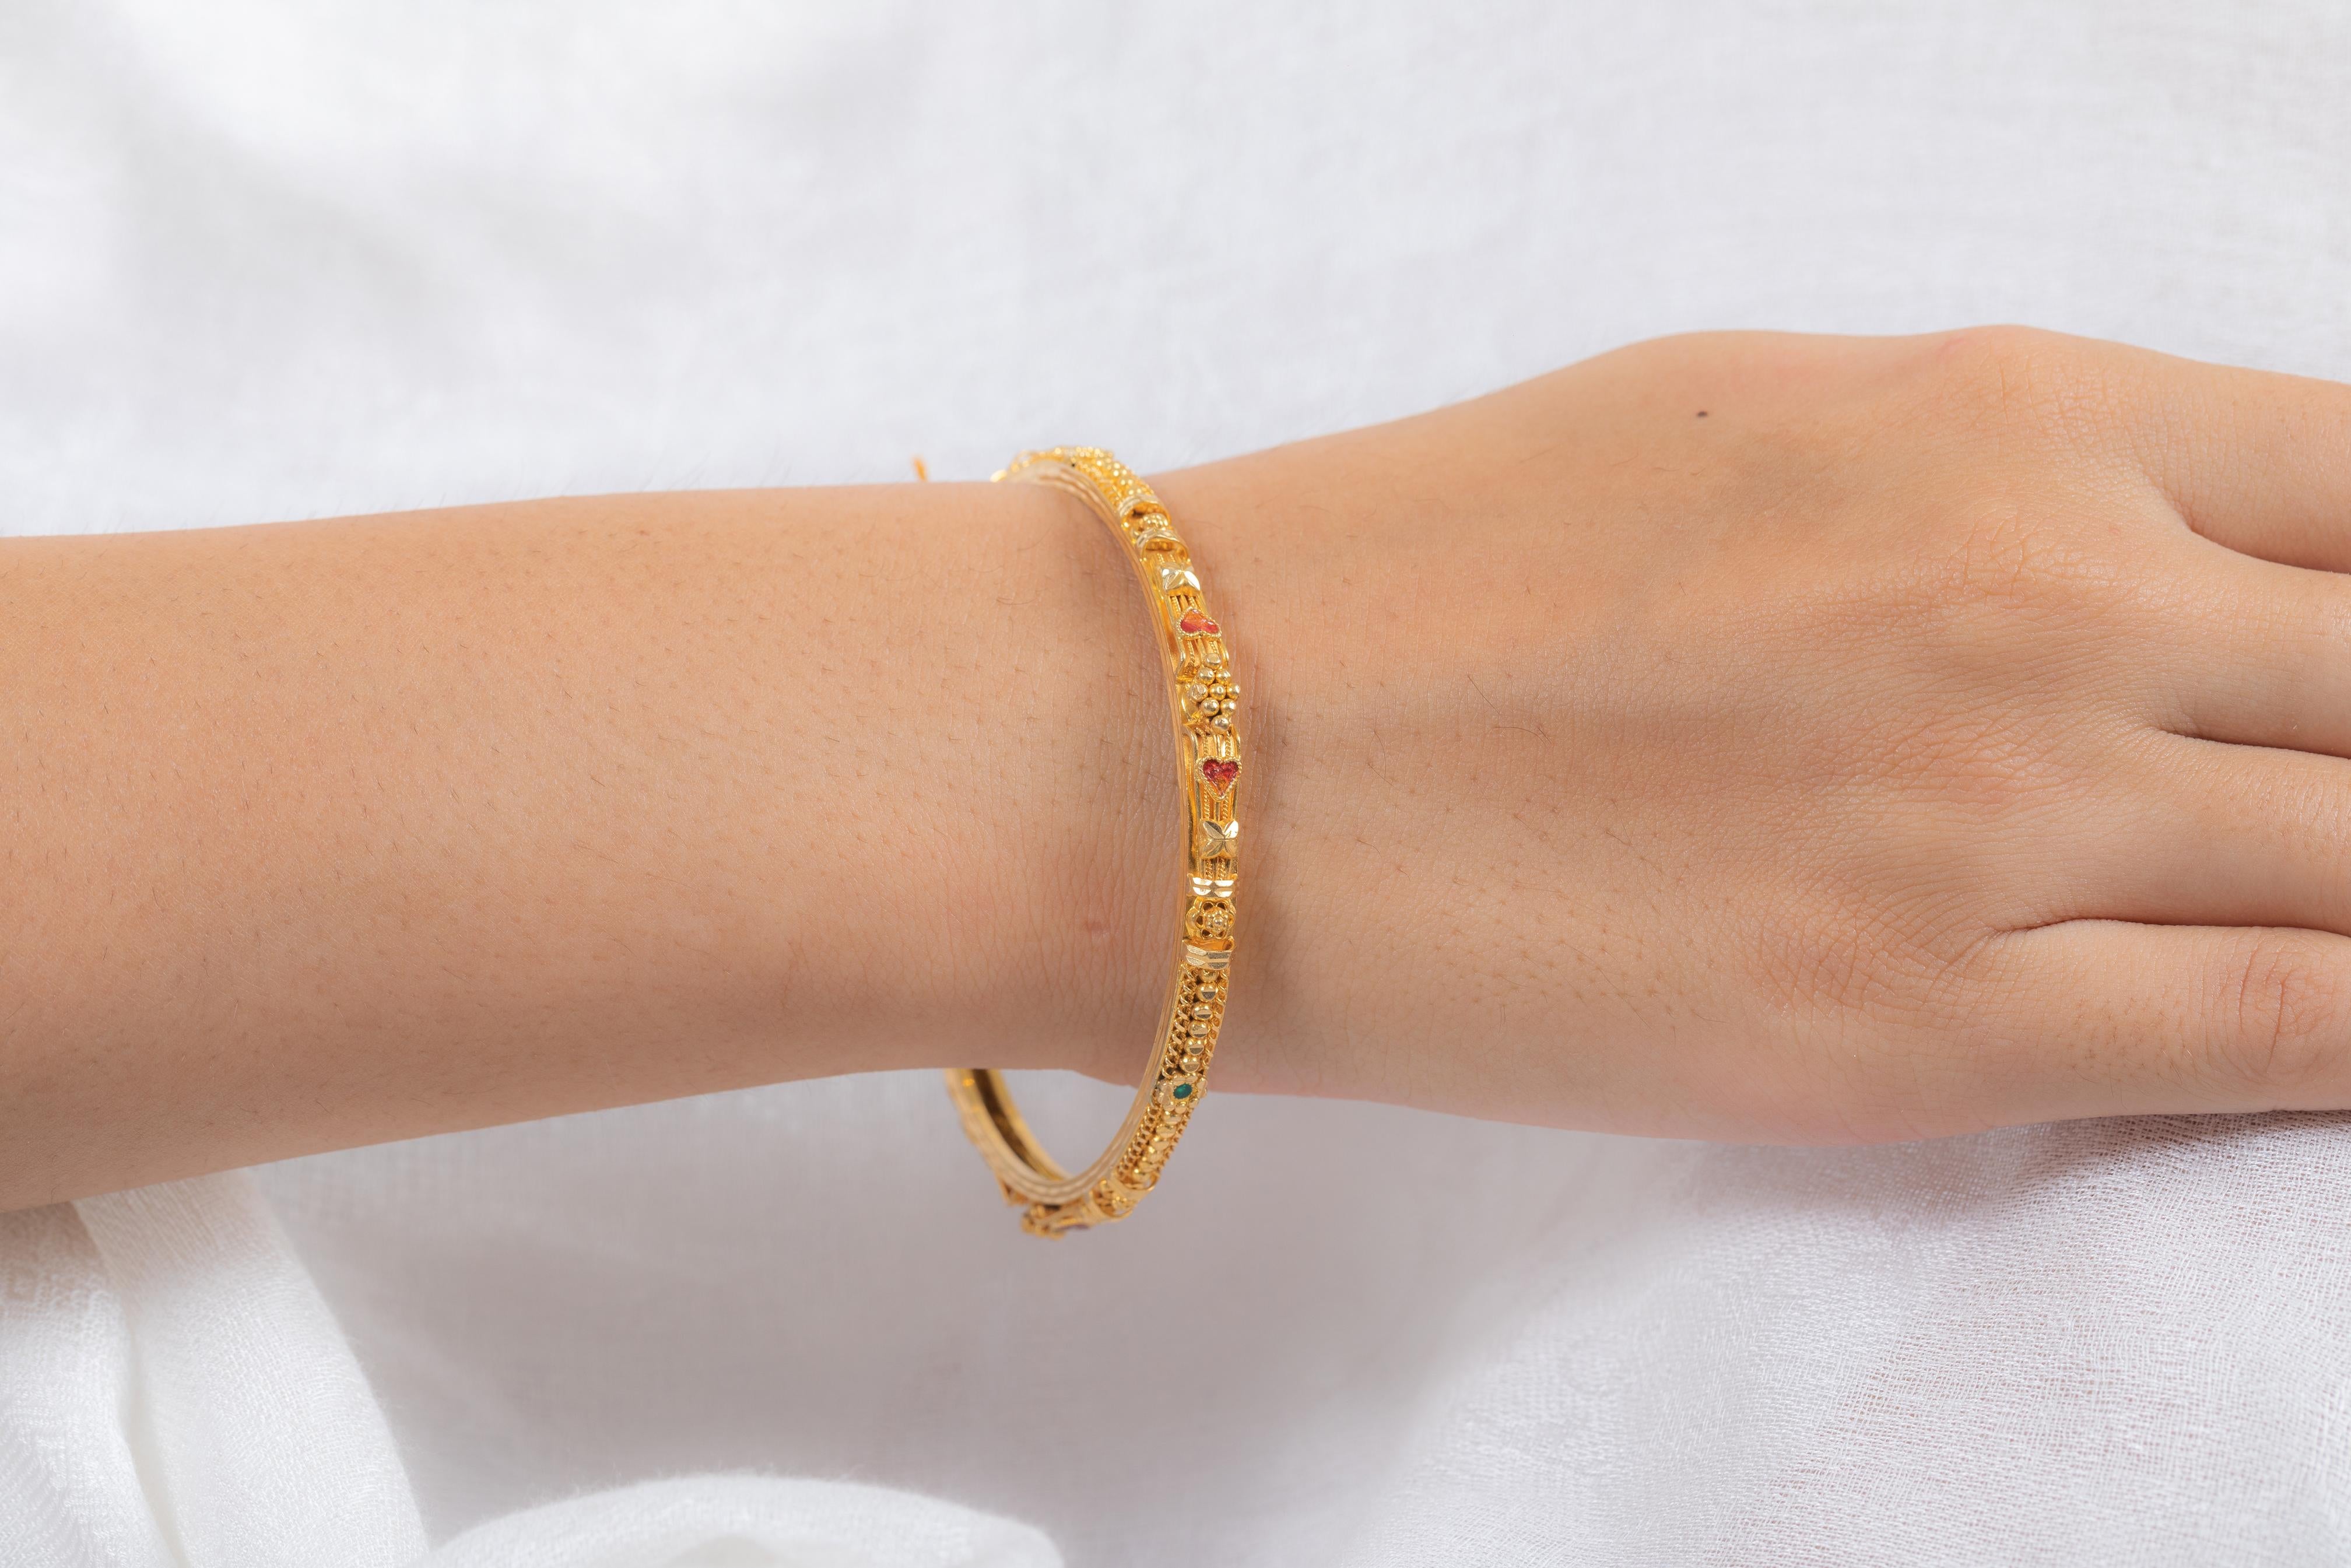 Enamel and engraved bangle in 18K gold. It’s a great jewelry ornament to wear on occasions and at the same time works as a wonderful gift for your loved ones. These lovely statement pieces are perfect generation jewelry to pass on.
Bangles feel